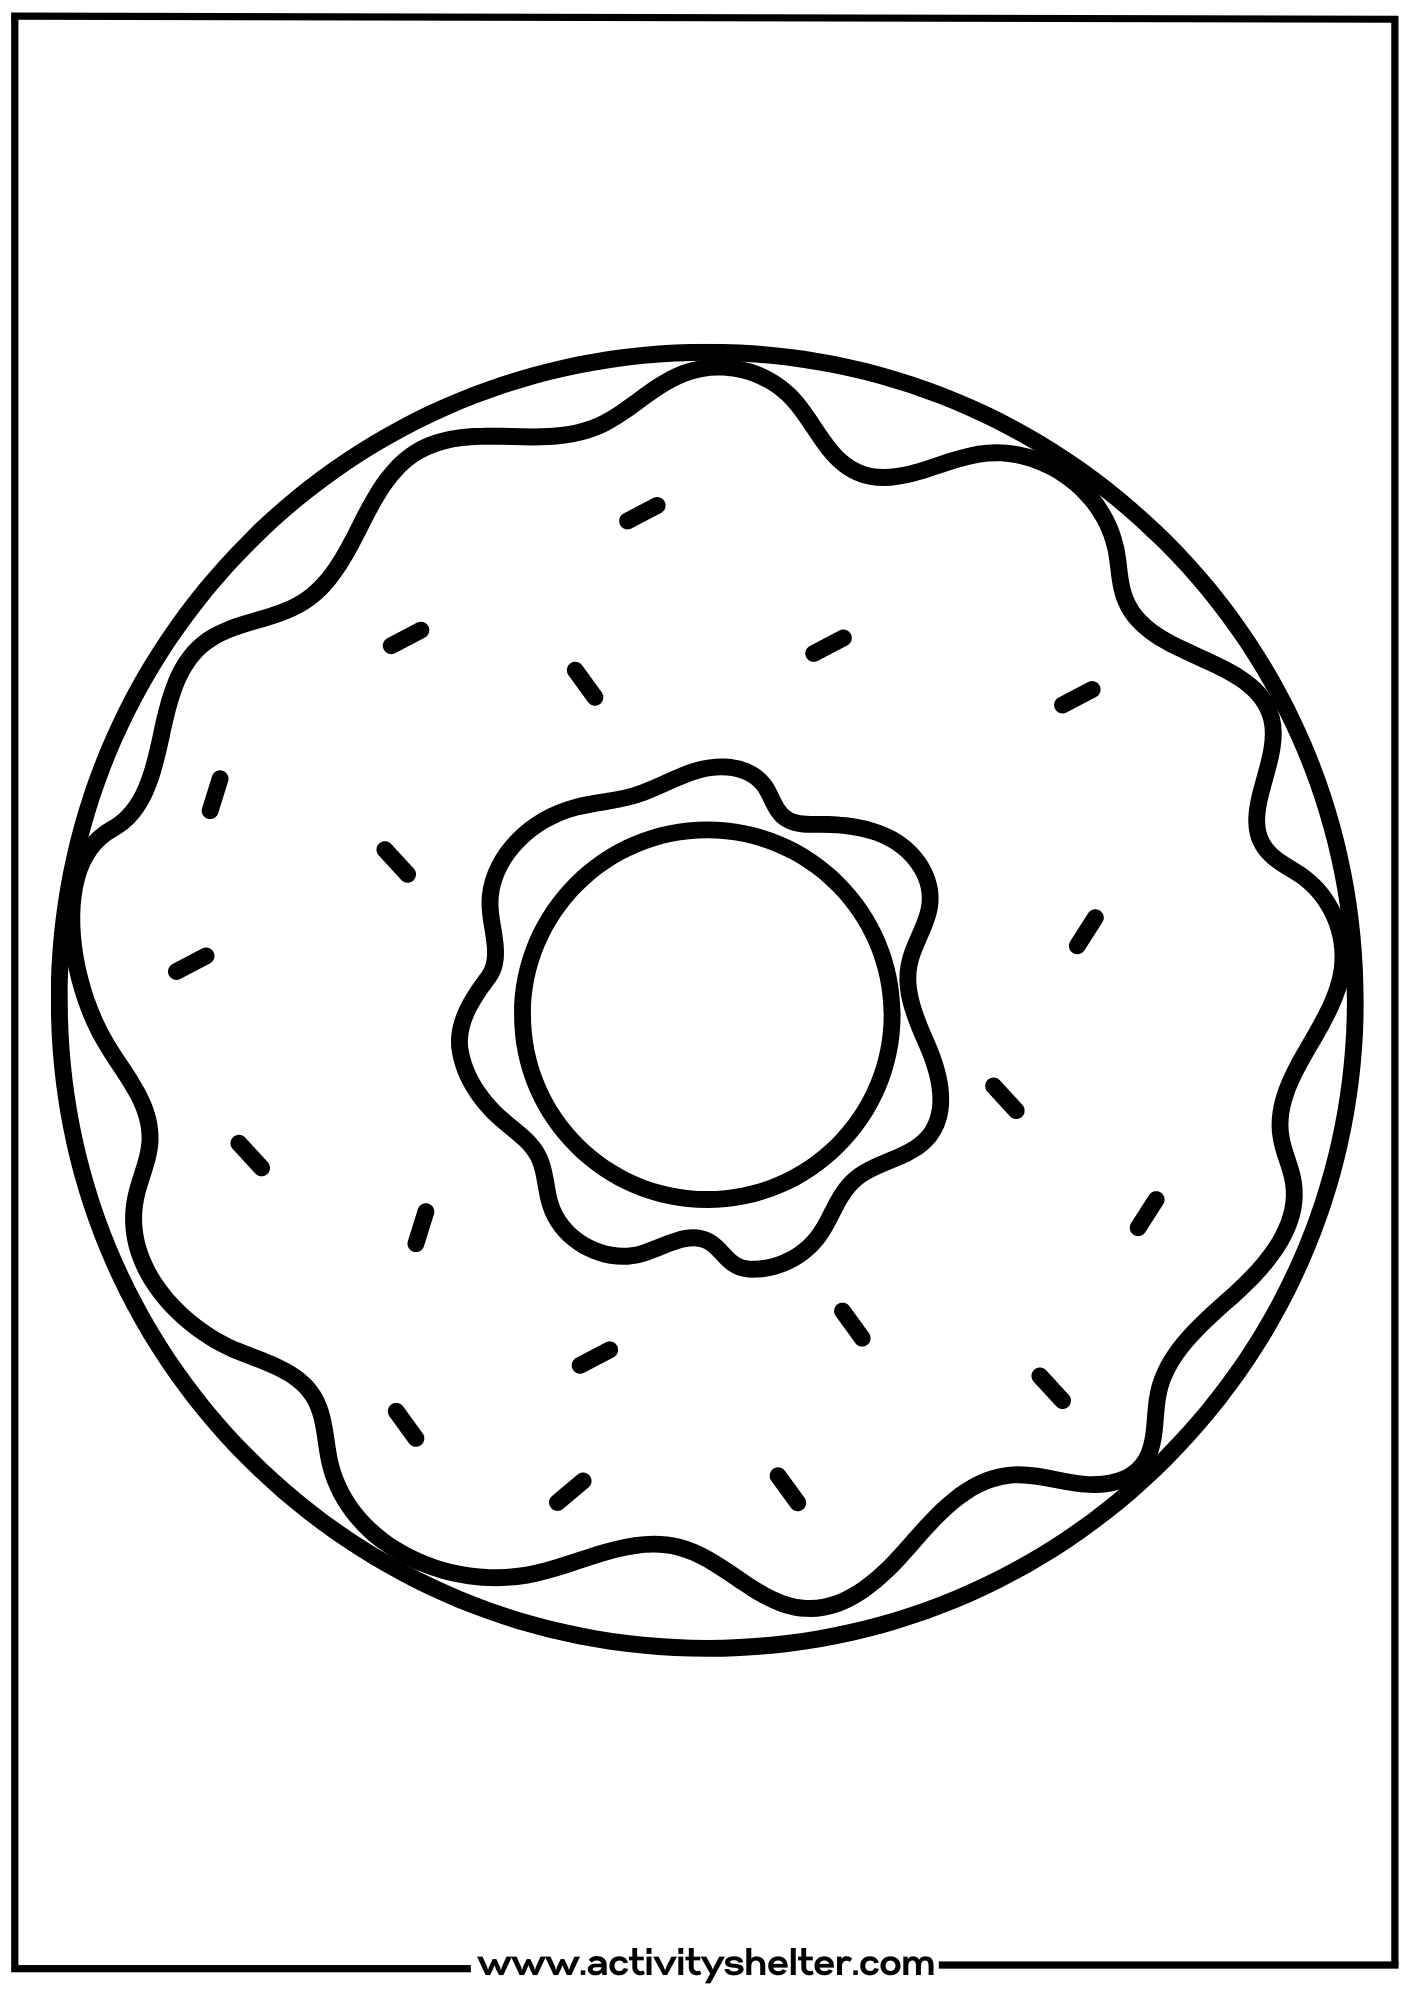 Coloring Pages Donuts